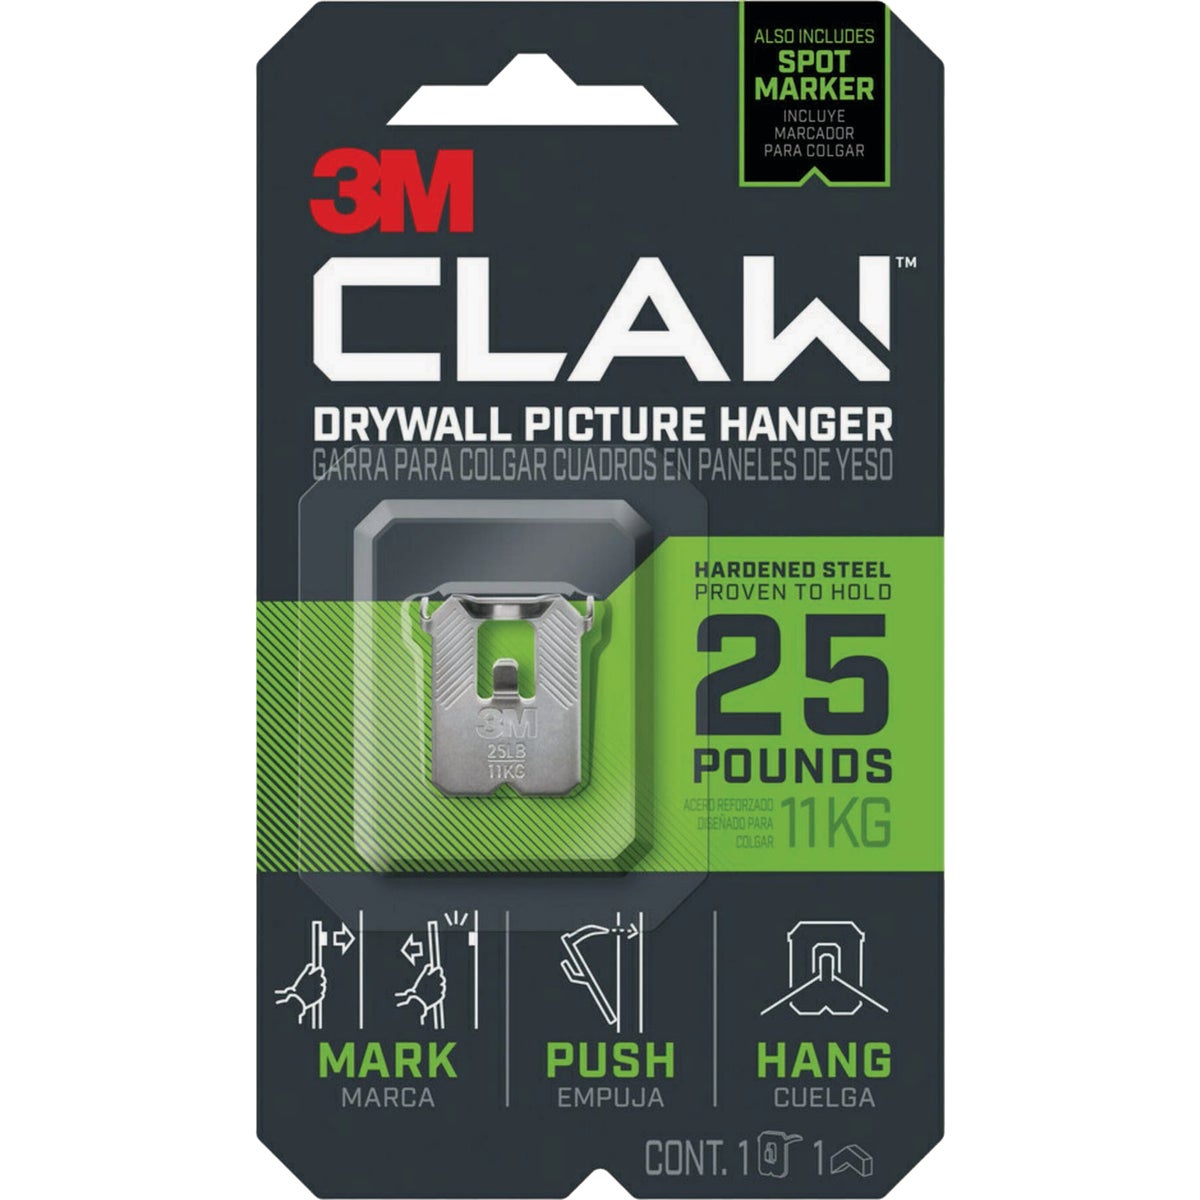 3M Claw 25 Lb. Drywall Picture Hanger with Temporary Spot Marker (1 Hanger, 1 Marker)